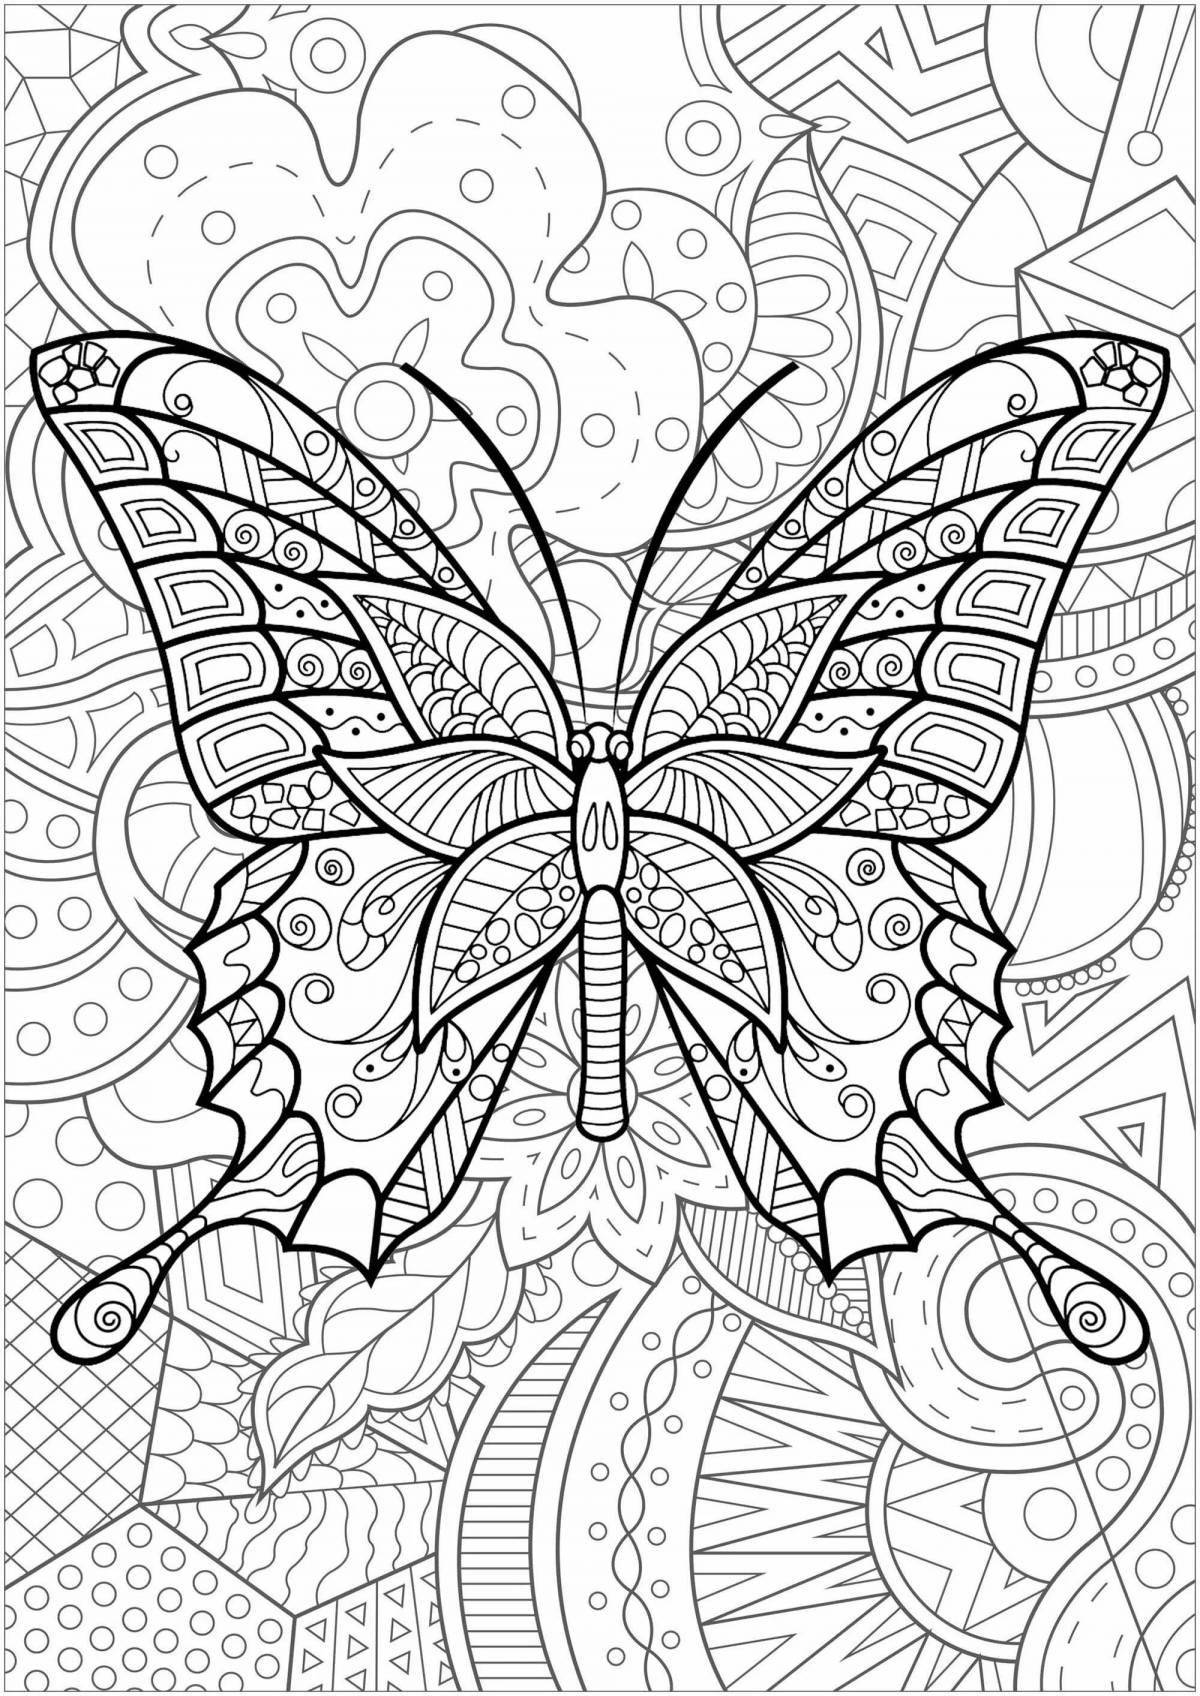 Coloring book shining anti-stress spider